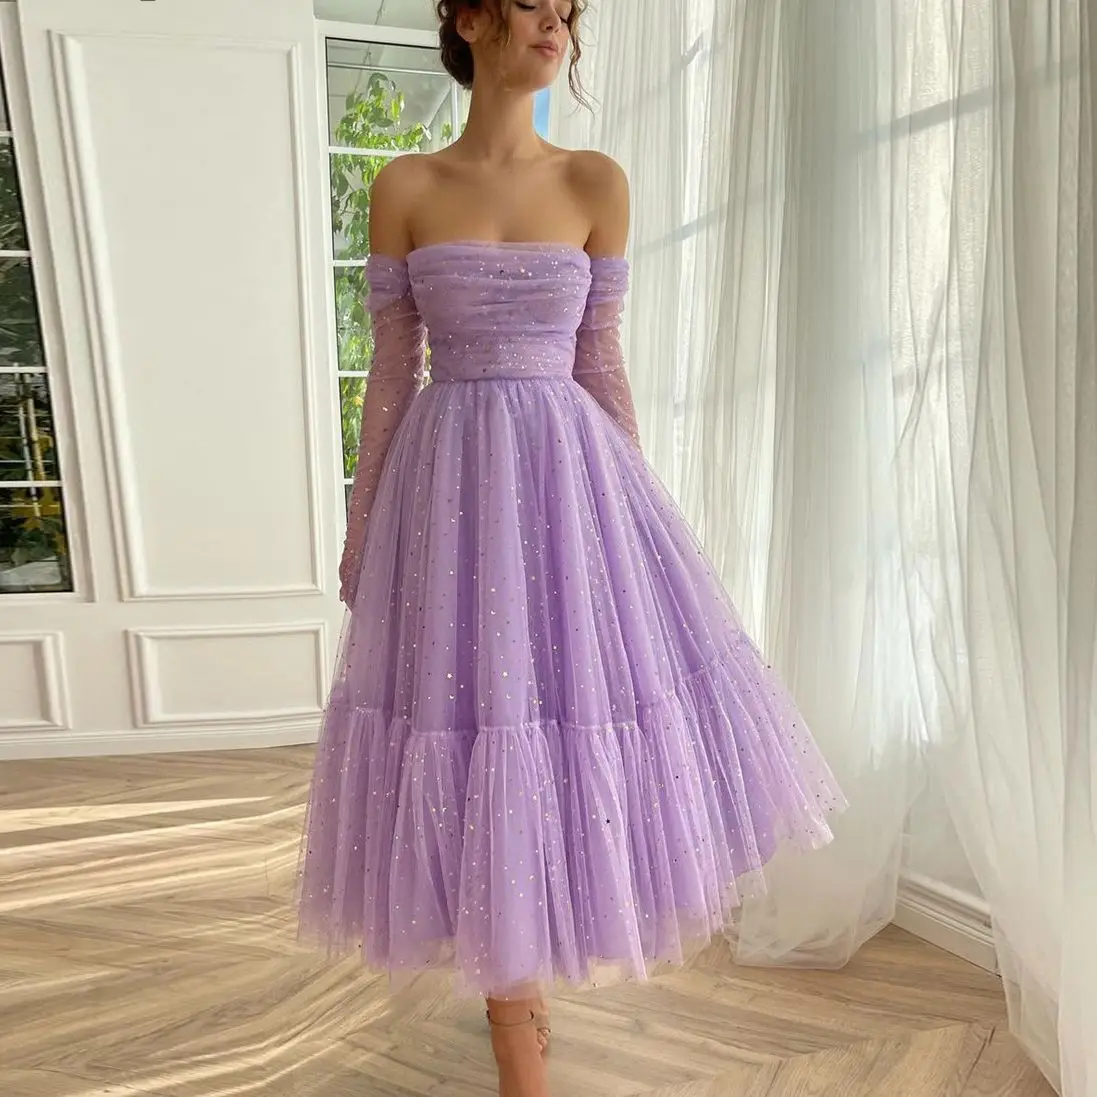 

Lavender Starry Tulle Short Prom Dresses Tight Long Sleeves Strapless Tiered Homecoming Gowns Formal Party Girl Dress